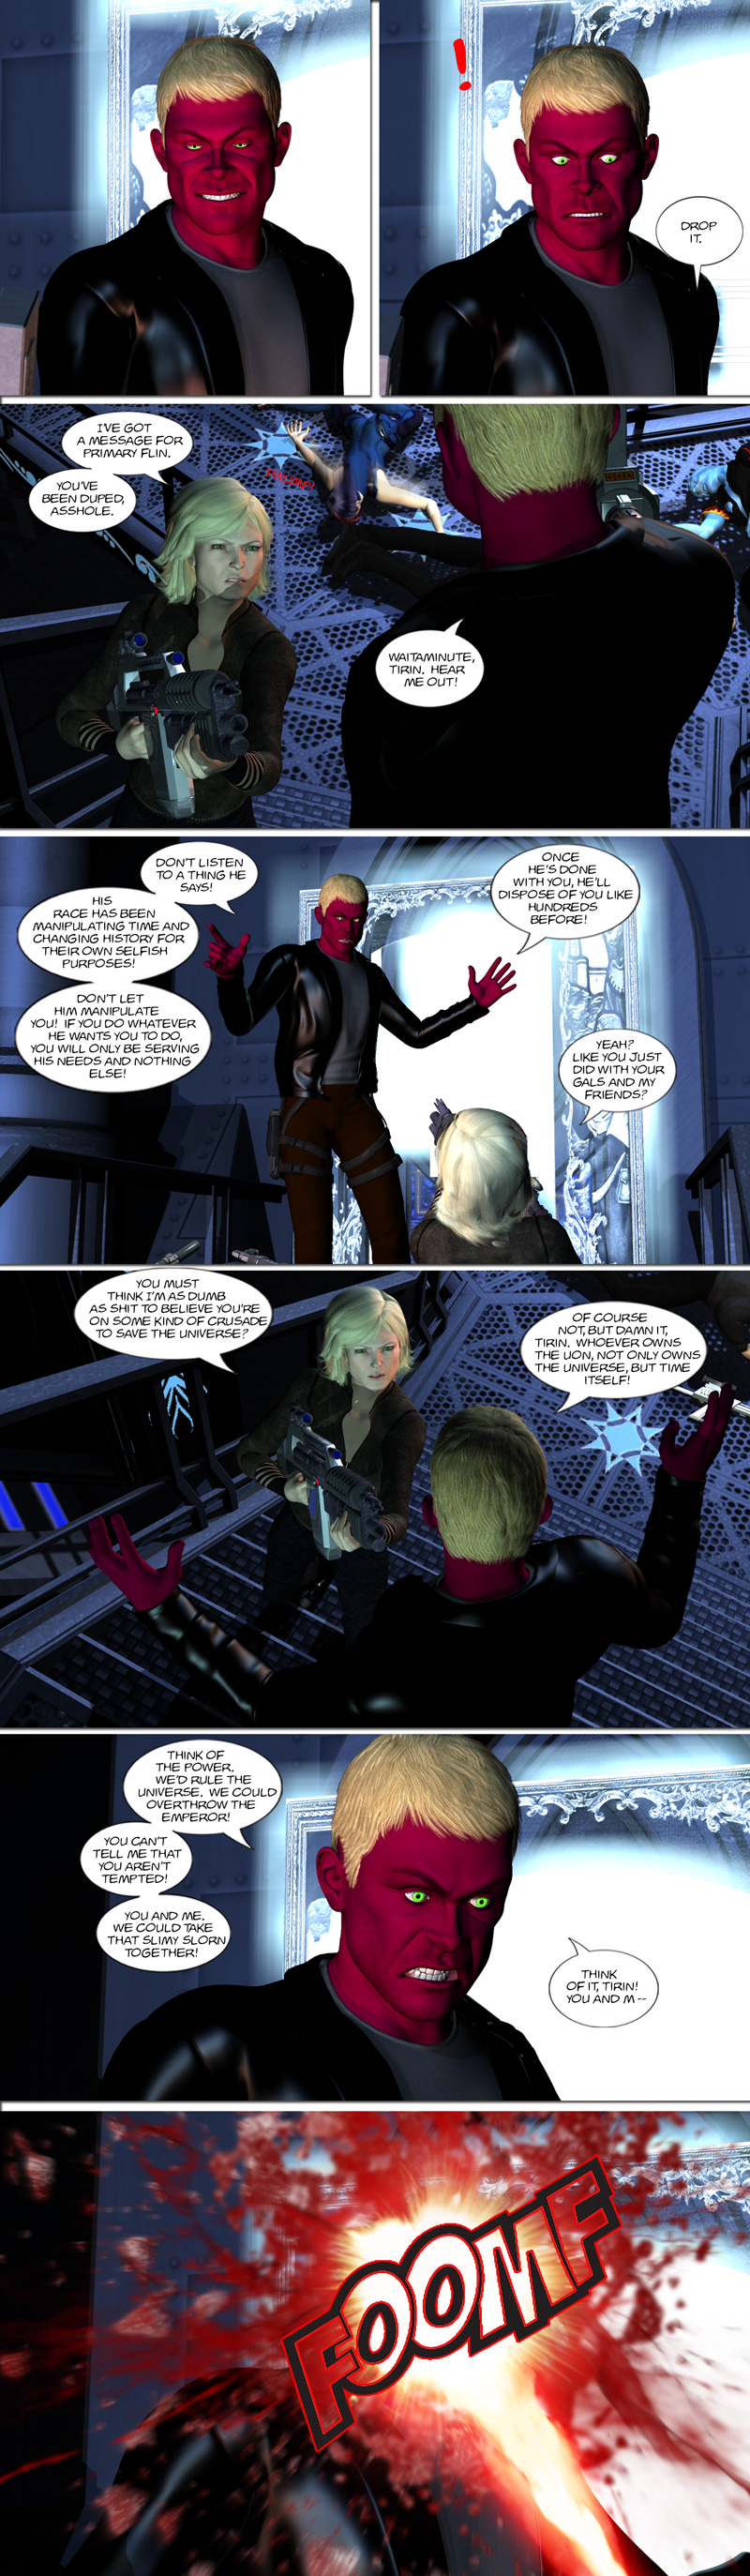 Chapter 10, page 15 – Flin’s fate